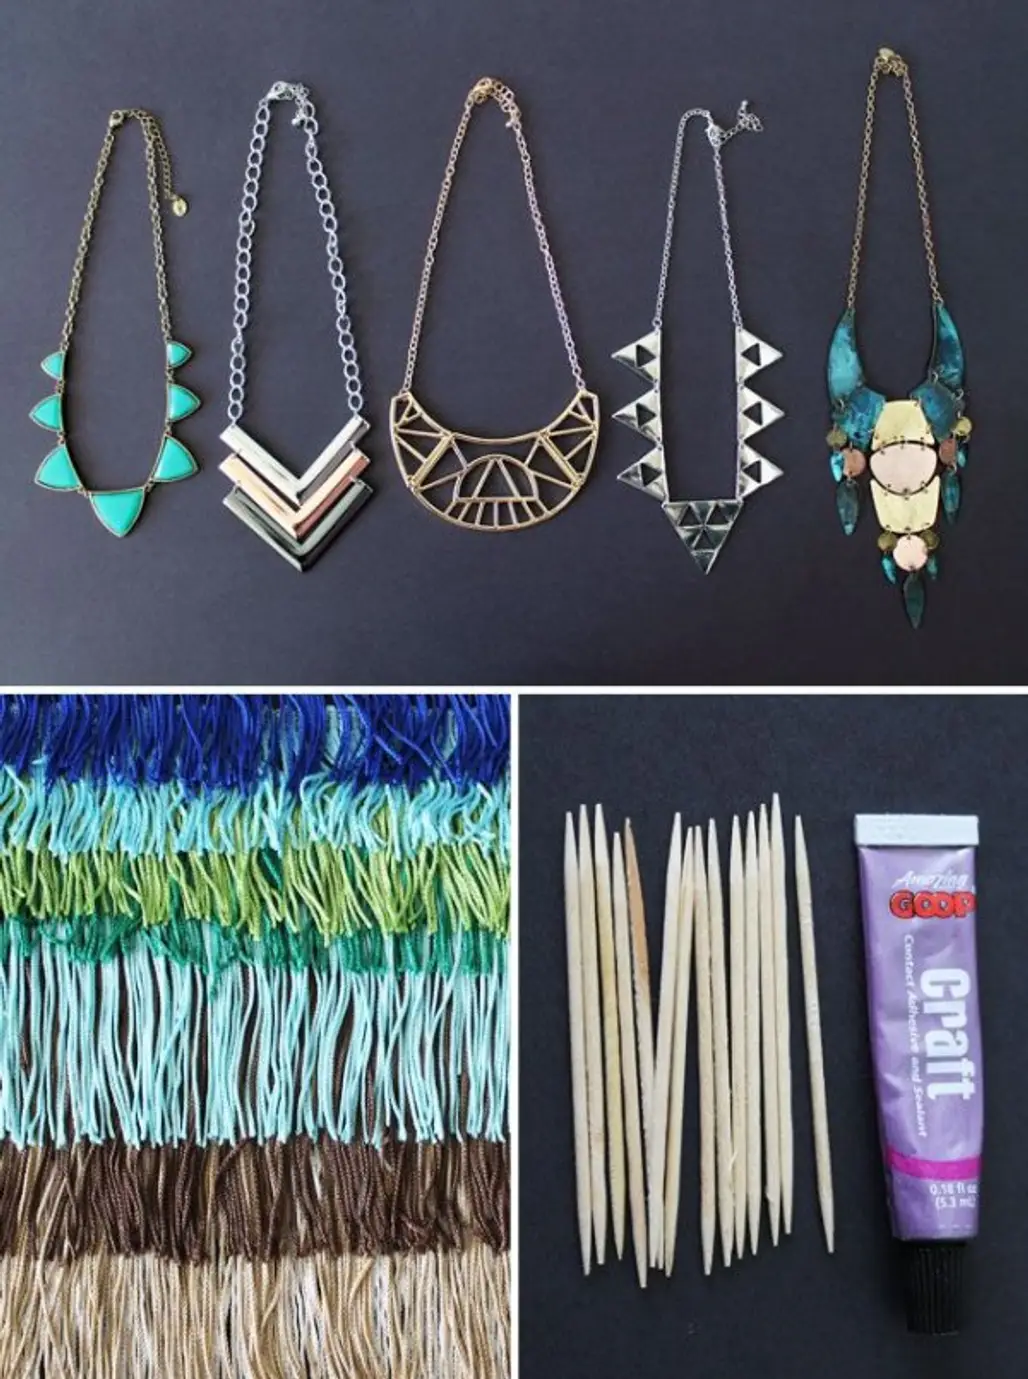 5 Fringe Statement Necklaces You Can Make in under 5 Minutes